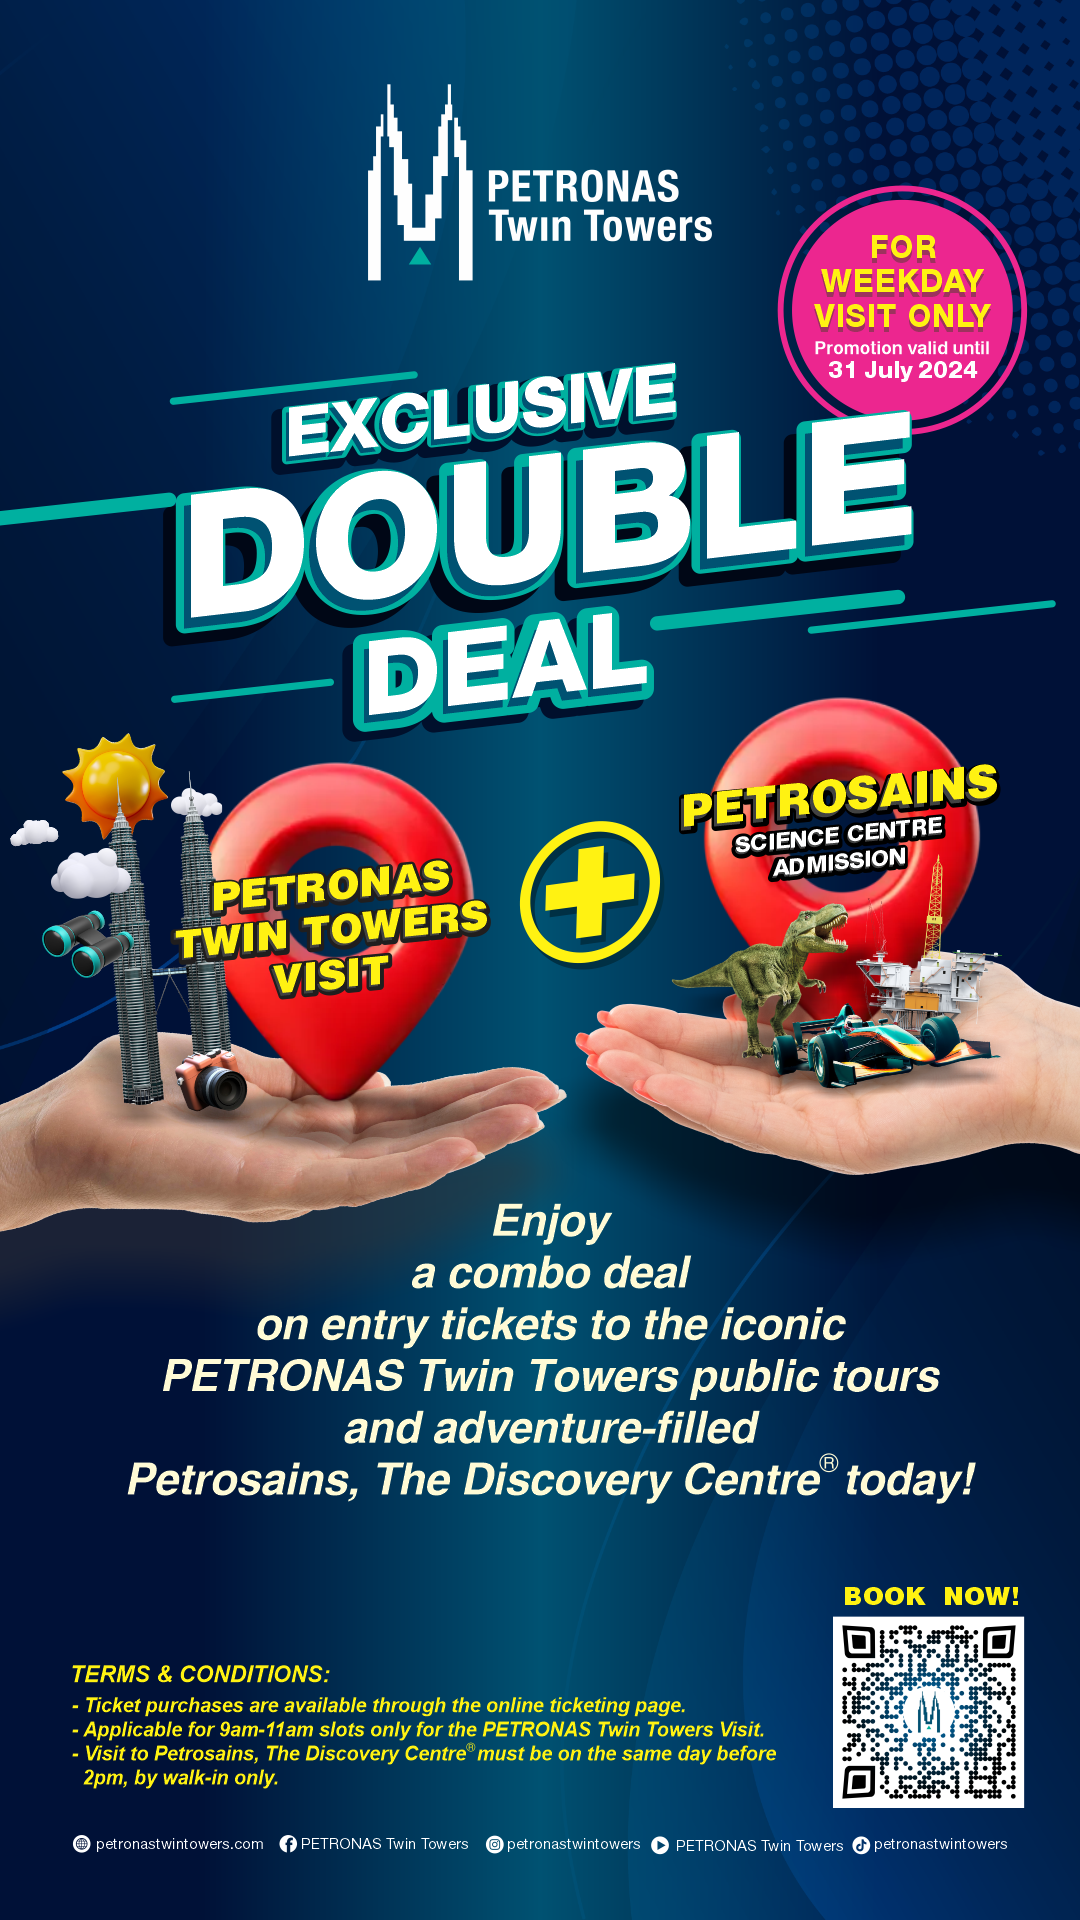 PETRONAS Twin Towers & Petrosains, The Discovery Centre Ticket Bundle Promo